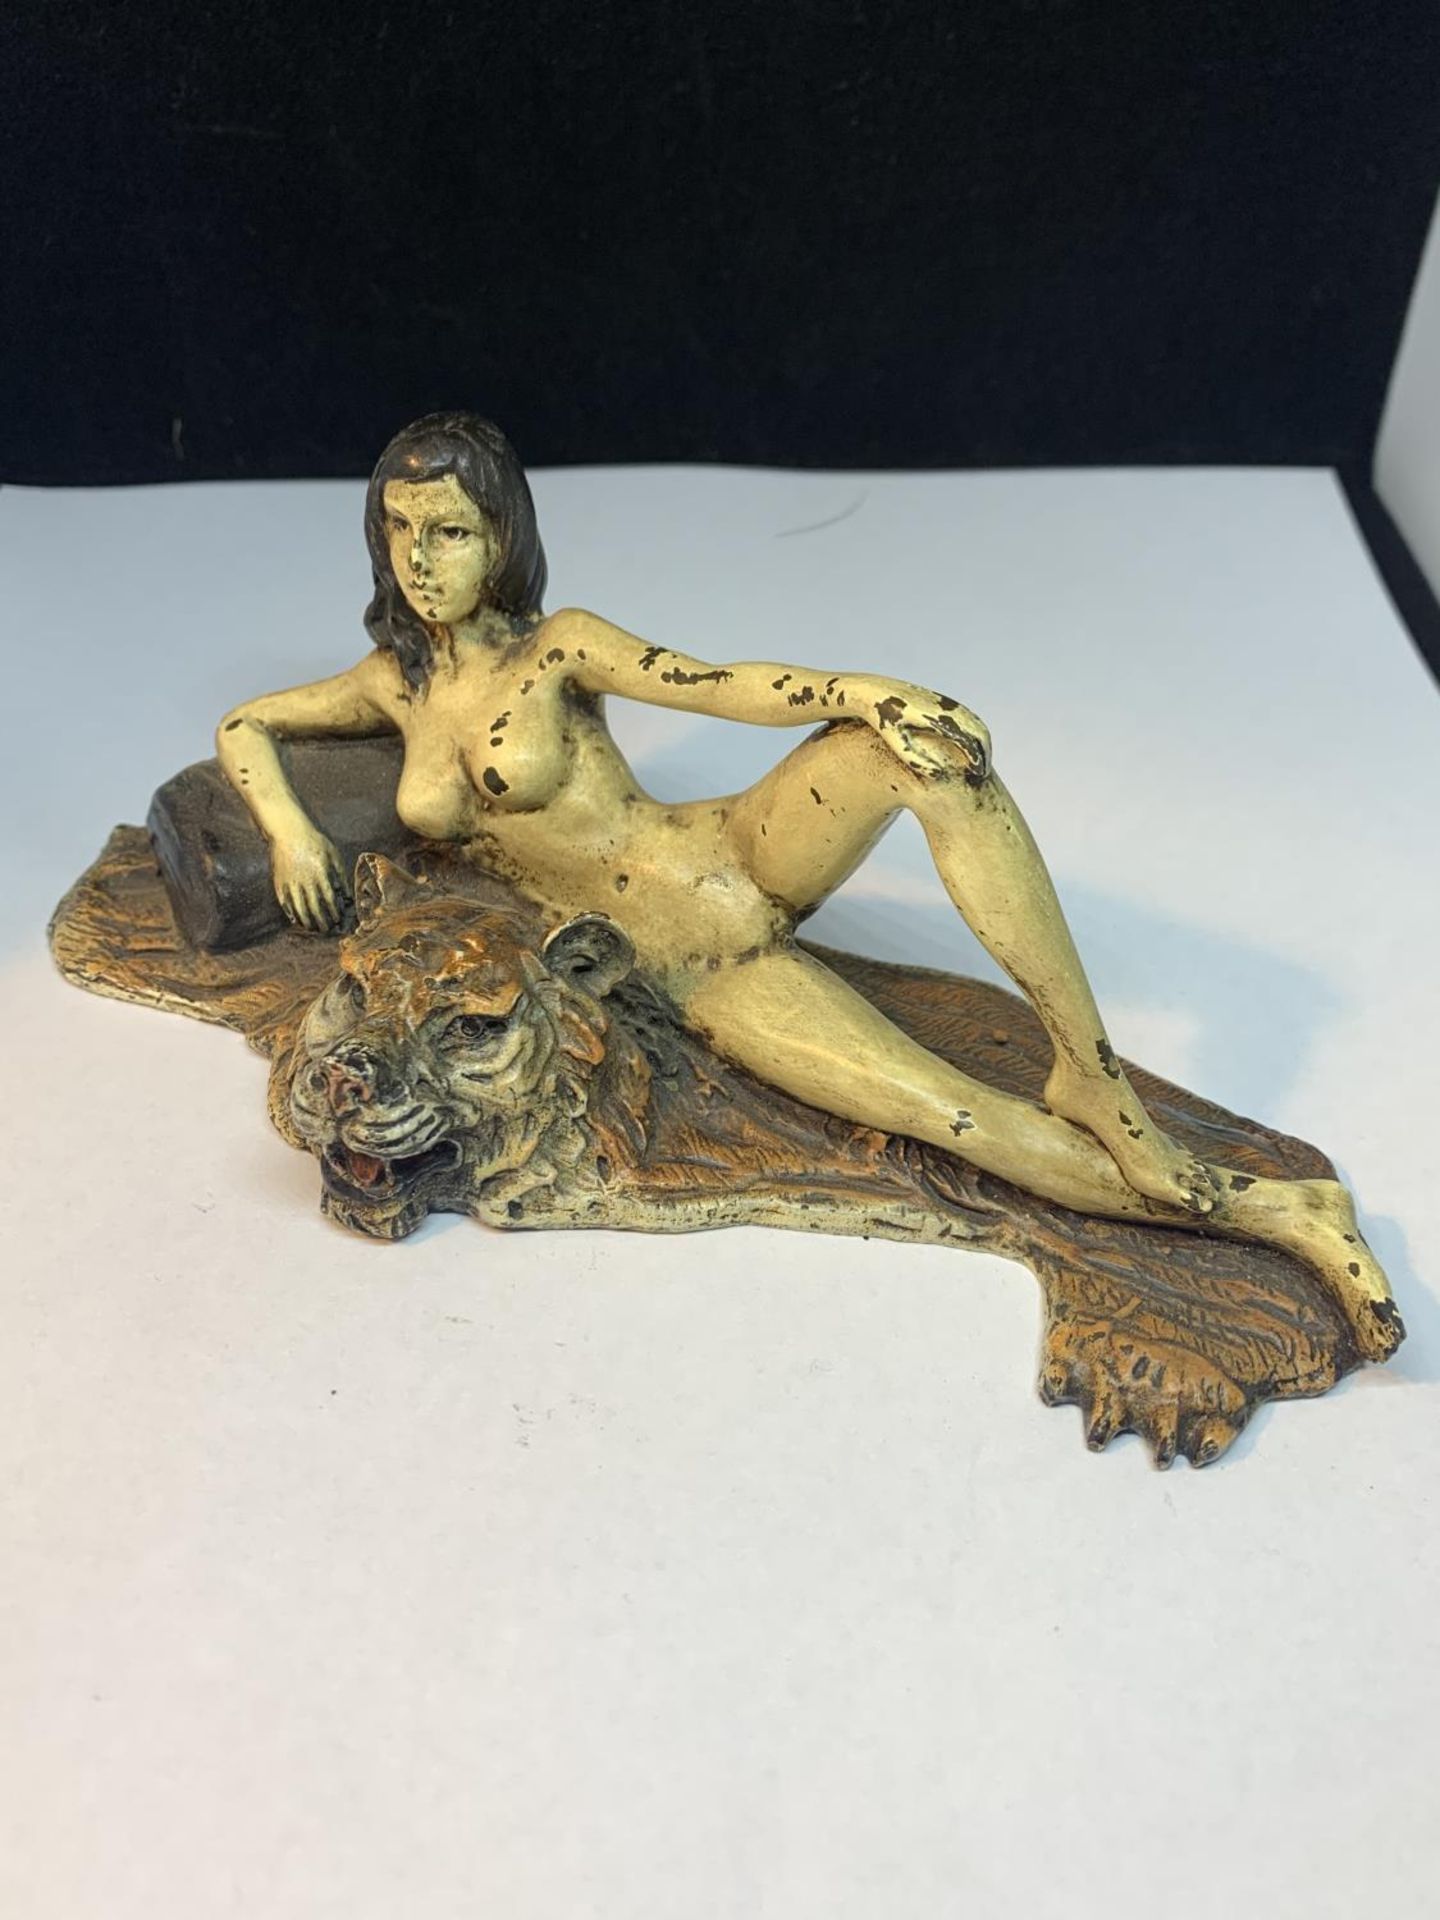 A COLD PAINTED BRONZE FIGURINE OF A NUDE LADY LYING ON A TIGER RUG